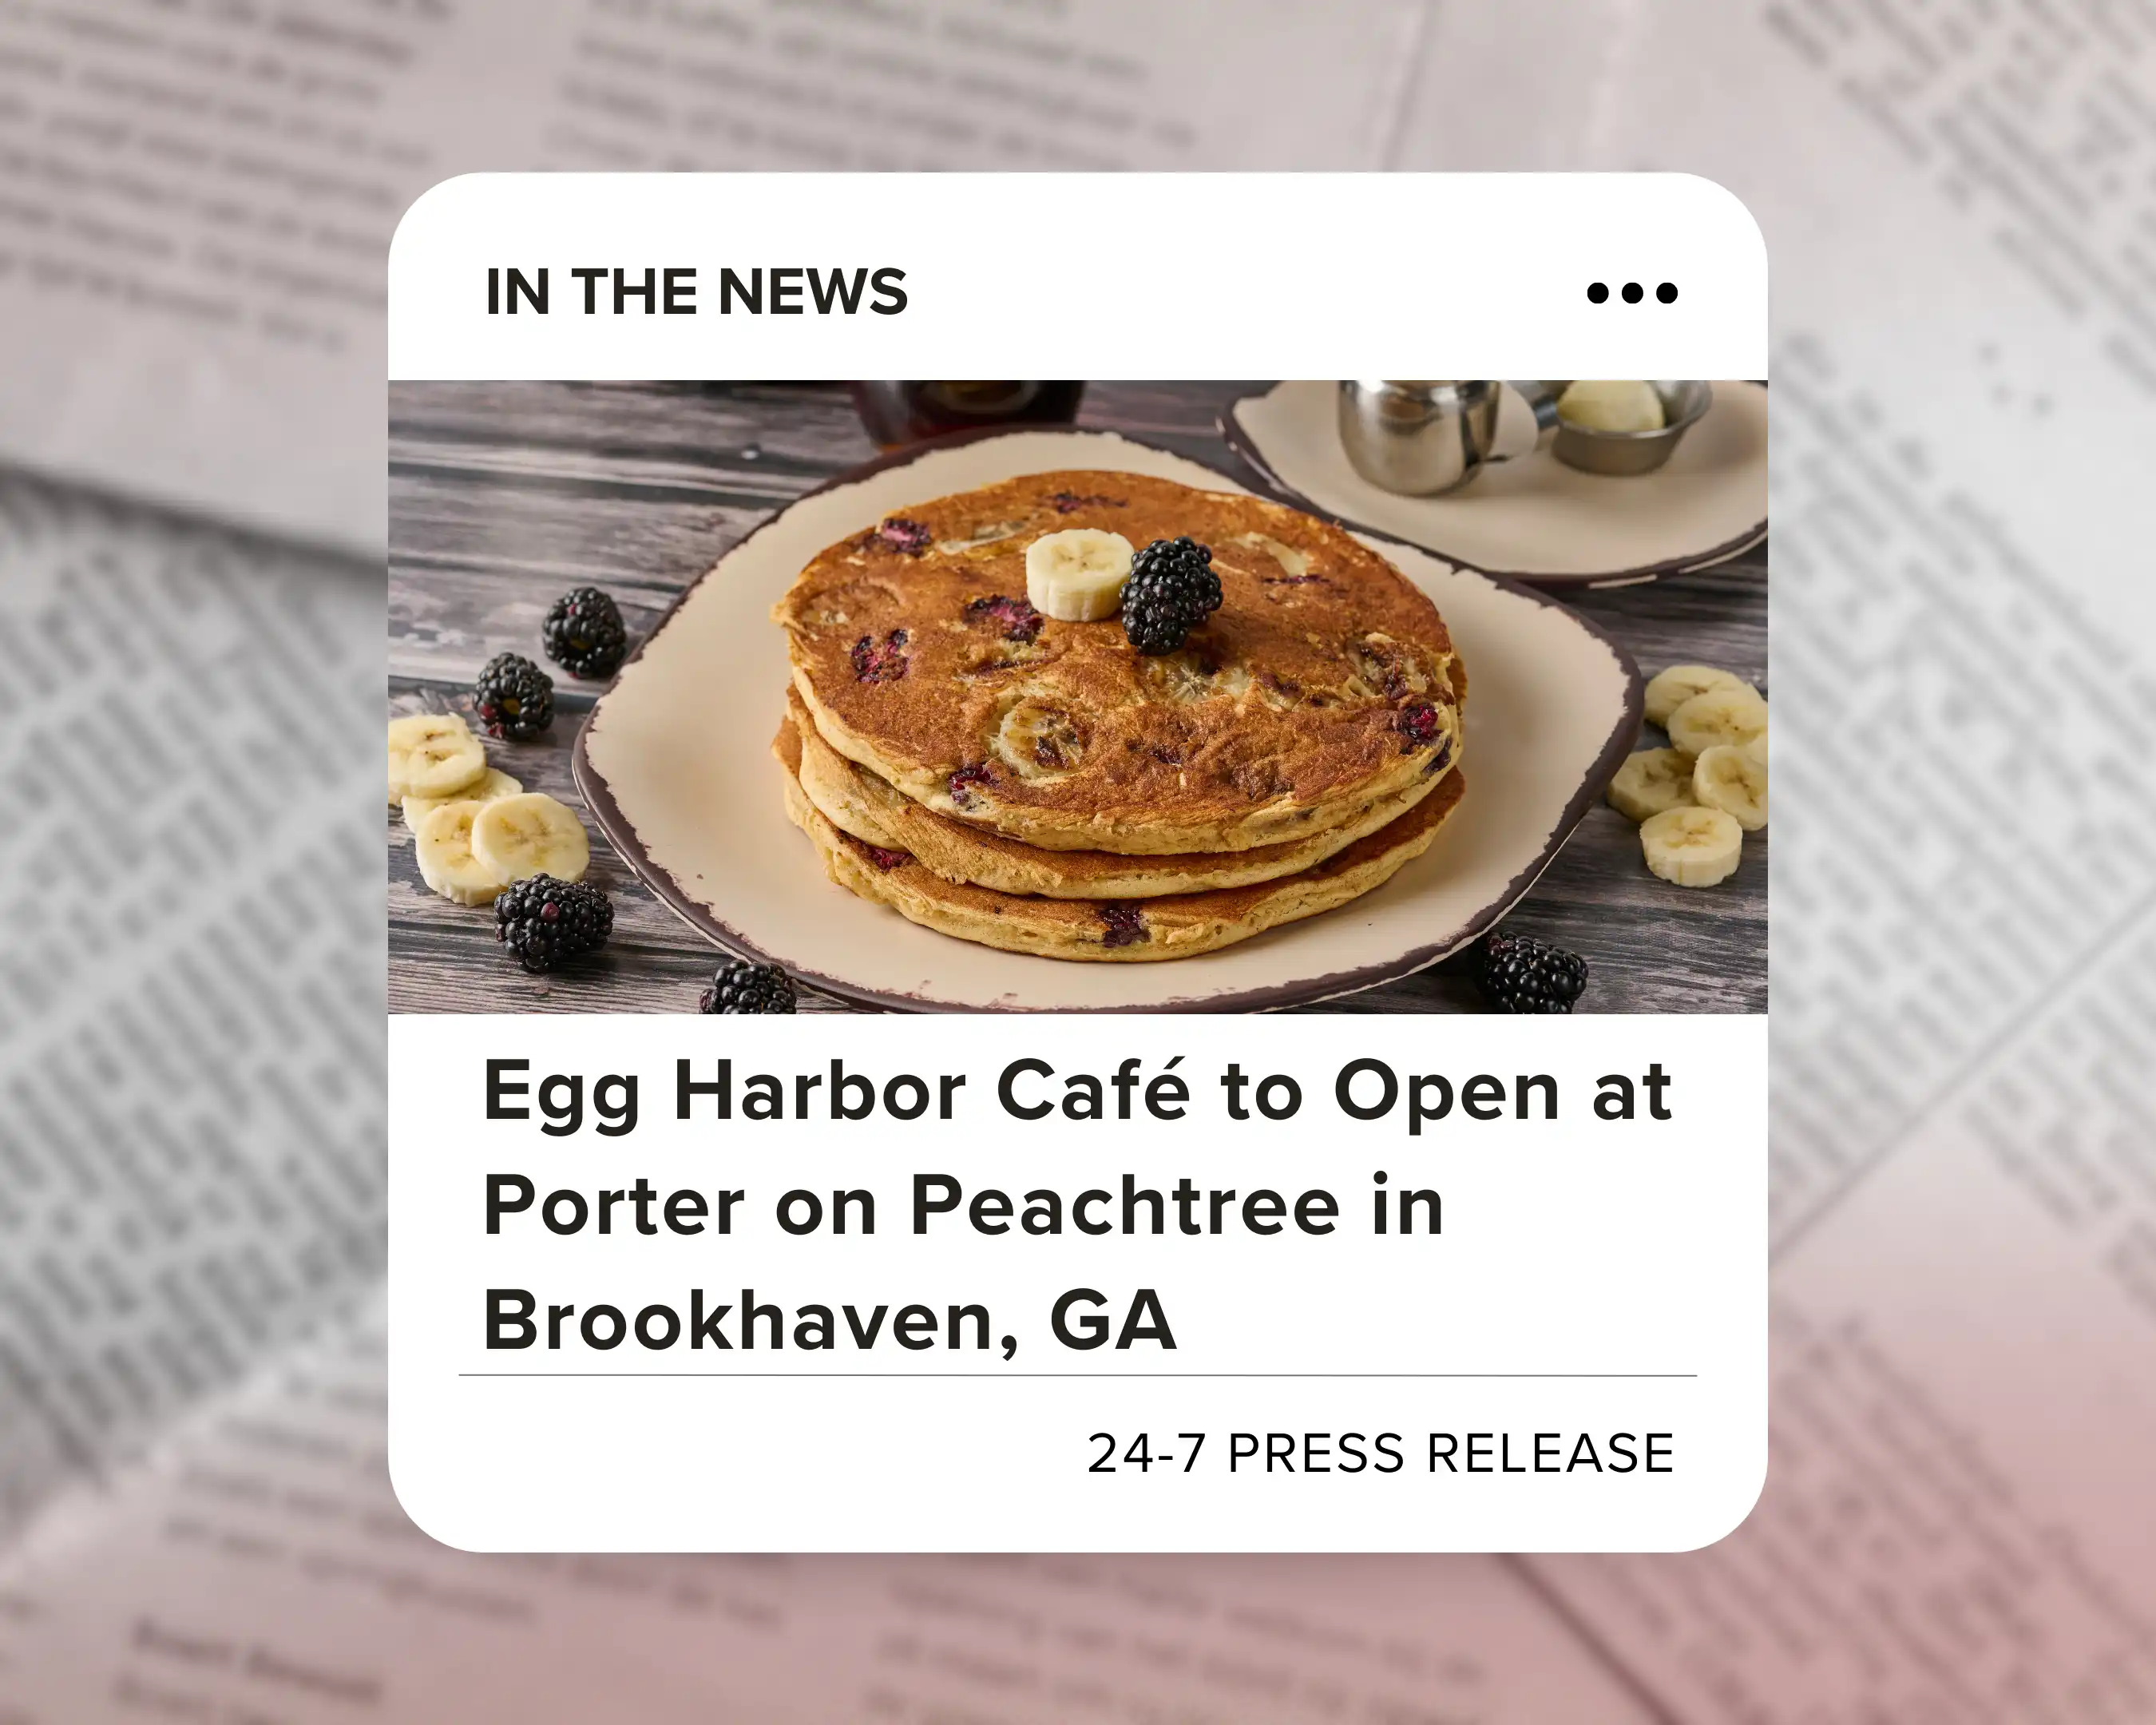 Egg Harbor Cafe Plans to Open a New Location in Downtown Decatur - 24/7 Press Release